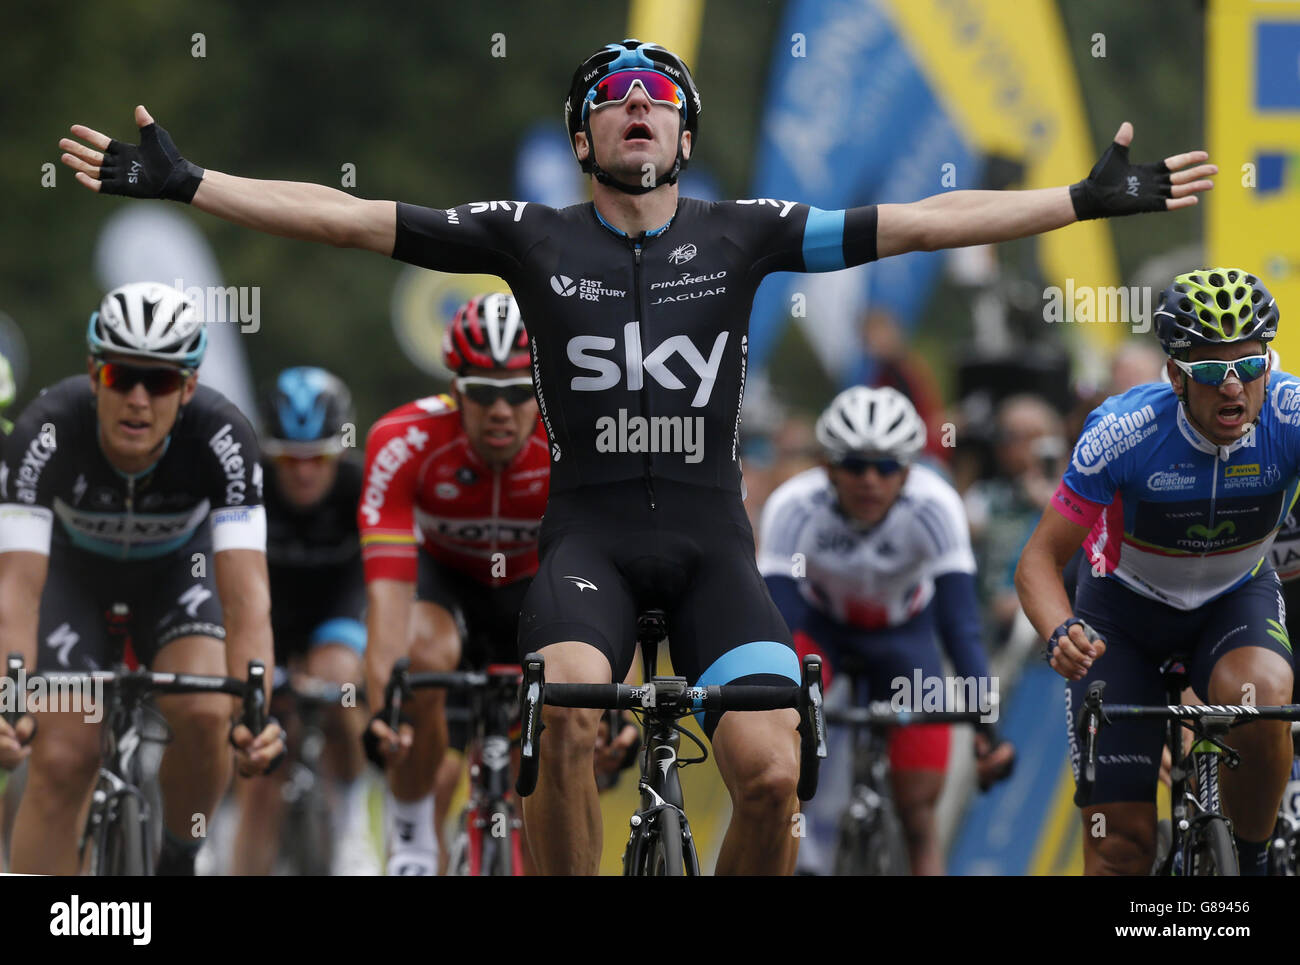 Cycling - Tour of Britain - Stage Three - Cockermouth to Floors Castle. Stage winner Elia Viviani from Team Sky crosses the finish line during Stage Three of the Tour of Britain from Cockermouth to Floors Castle. Stock Photo